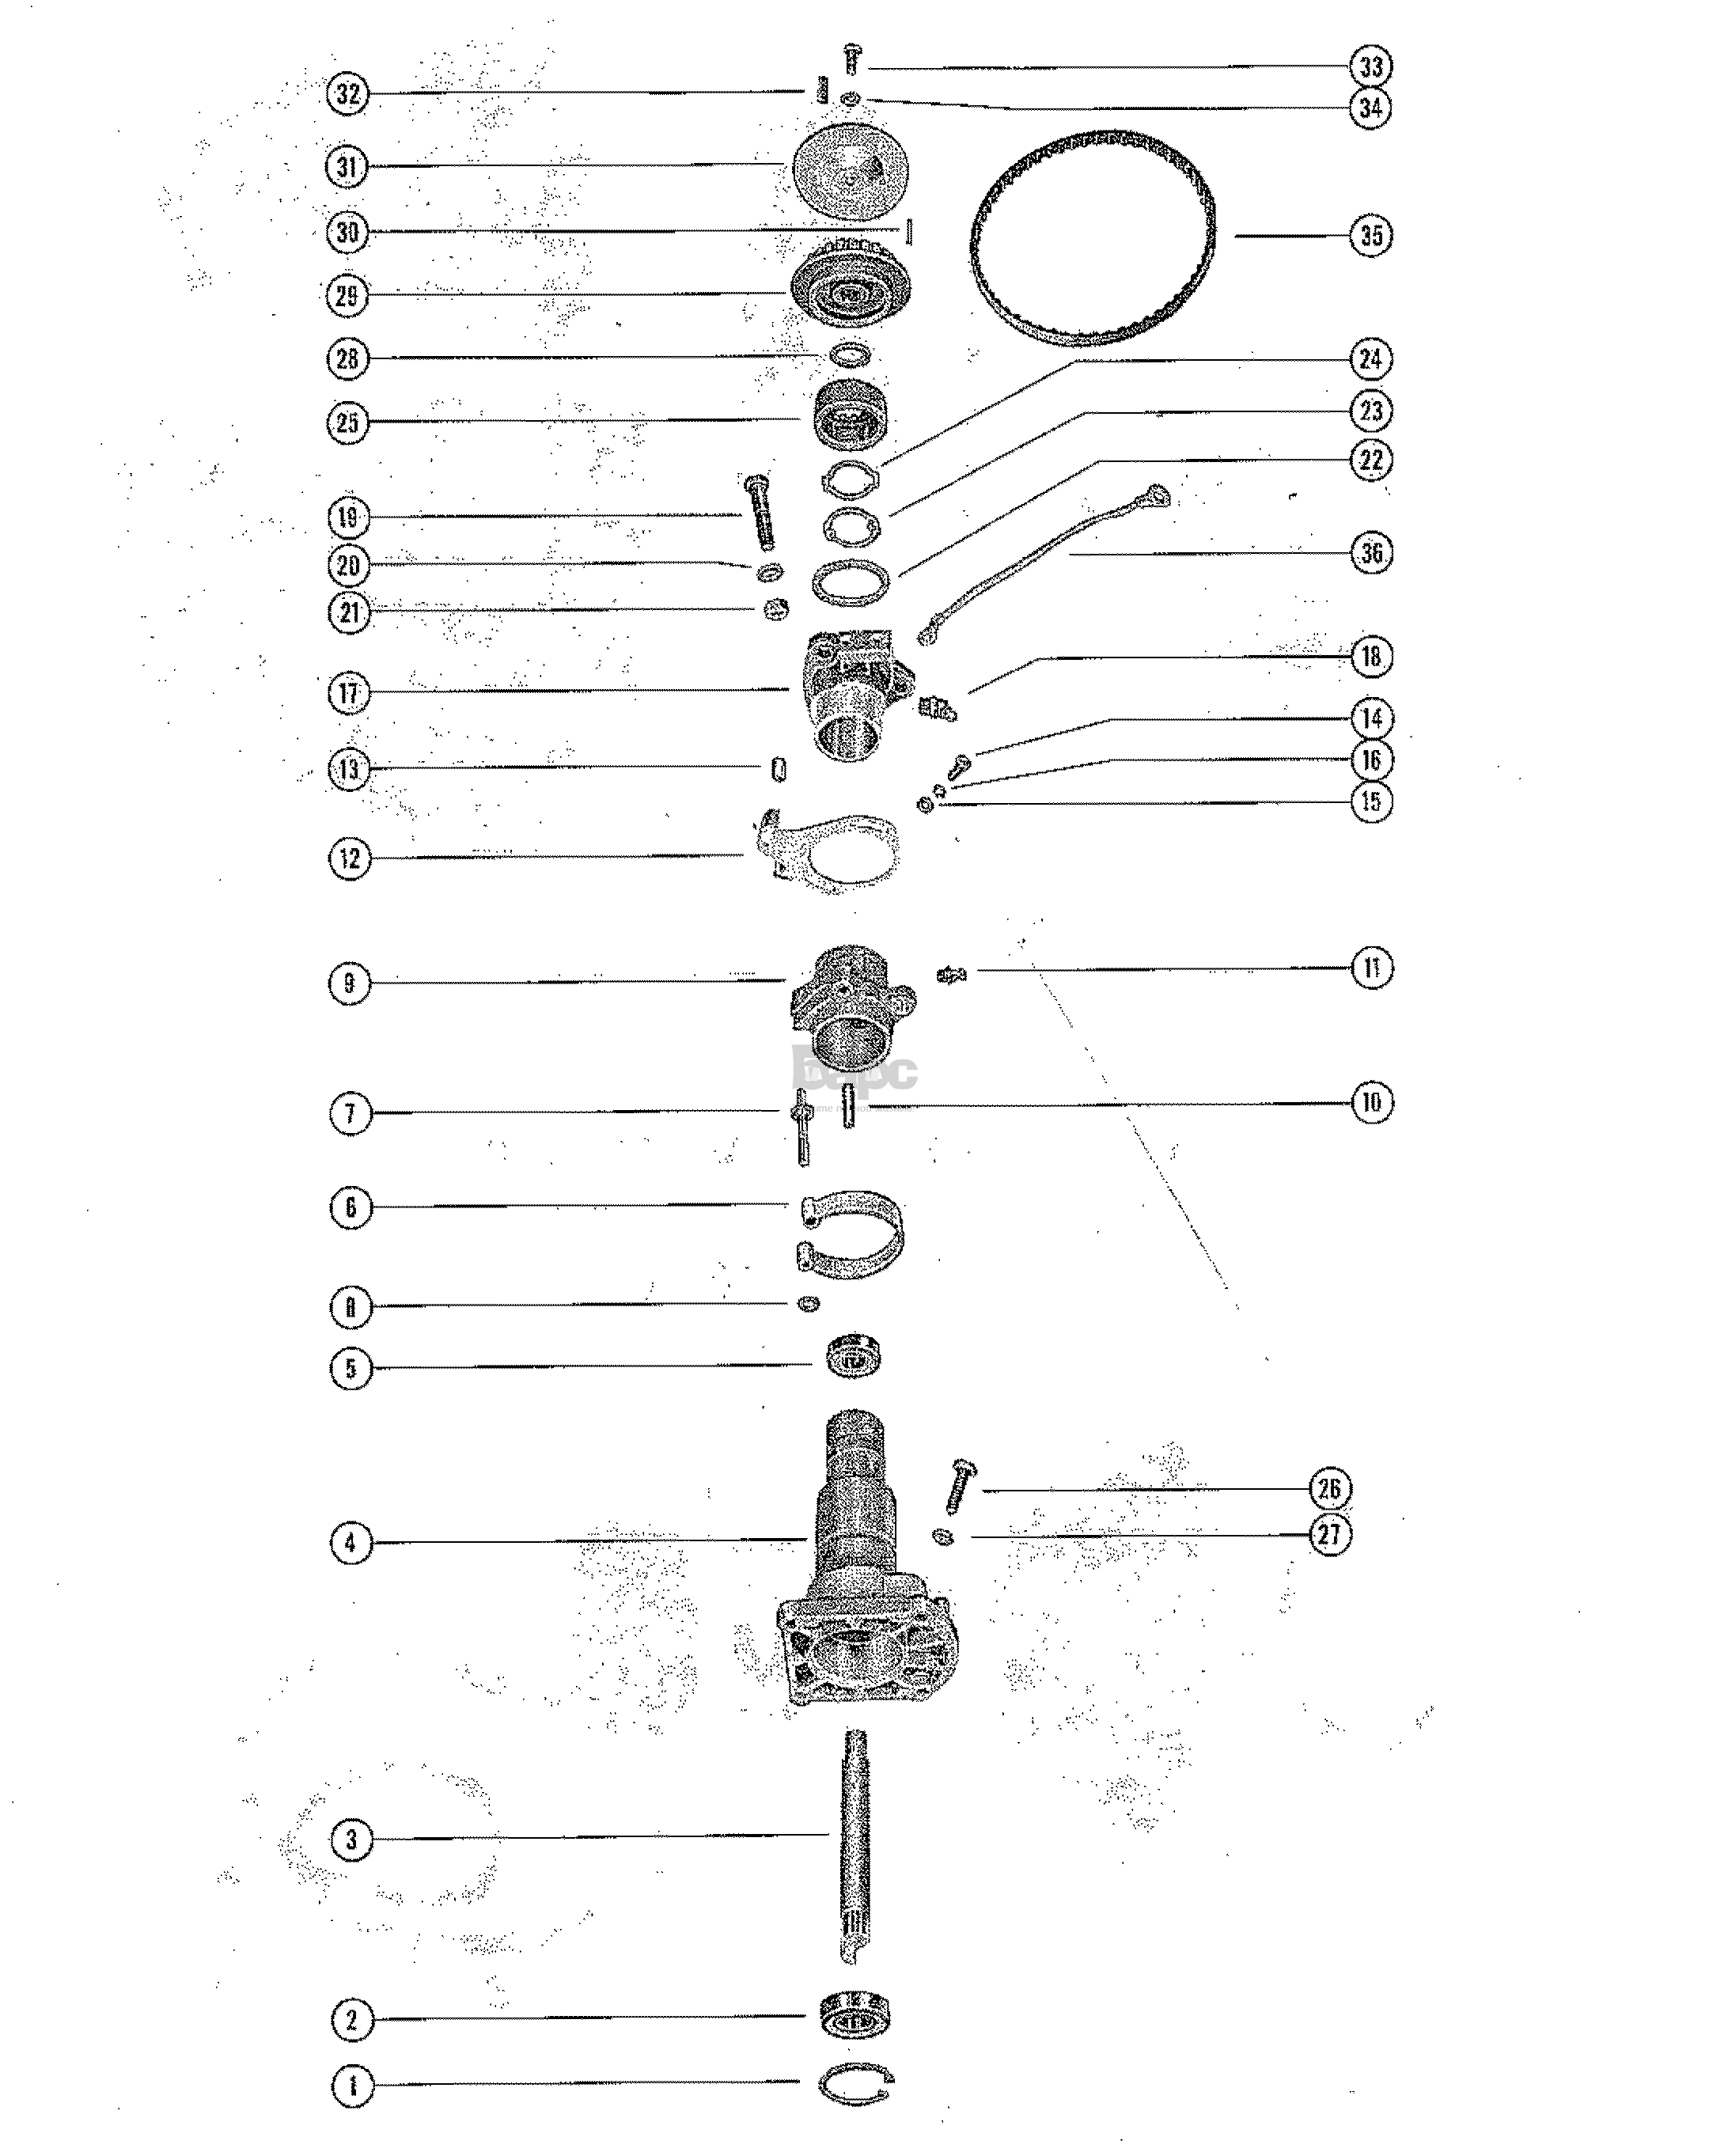 DISTRIBUTOR ADAPTOR AND PILOT ASSEMBLY